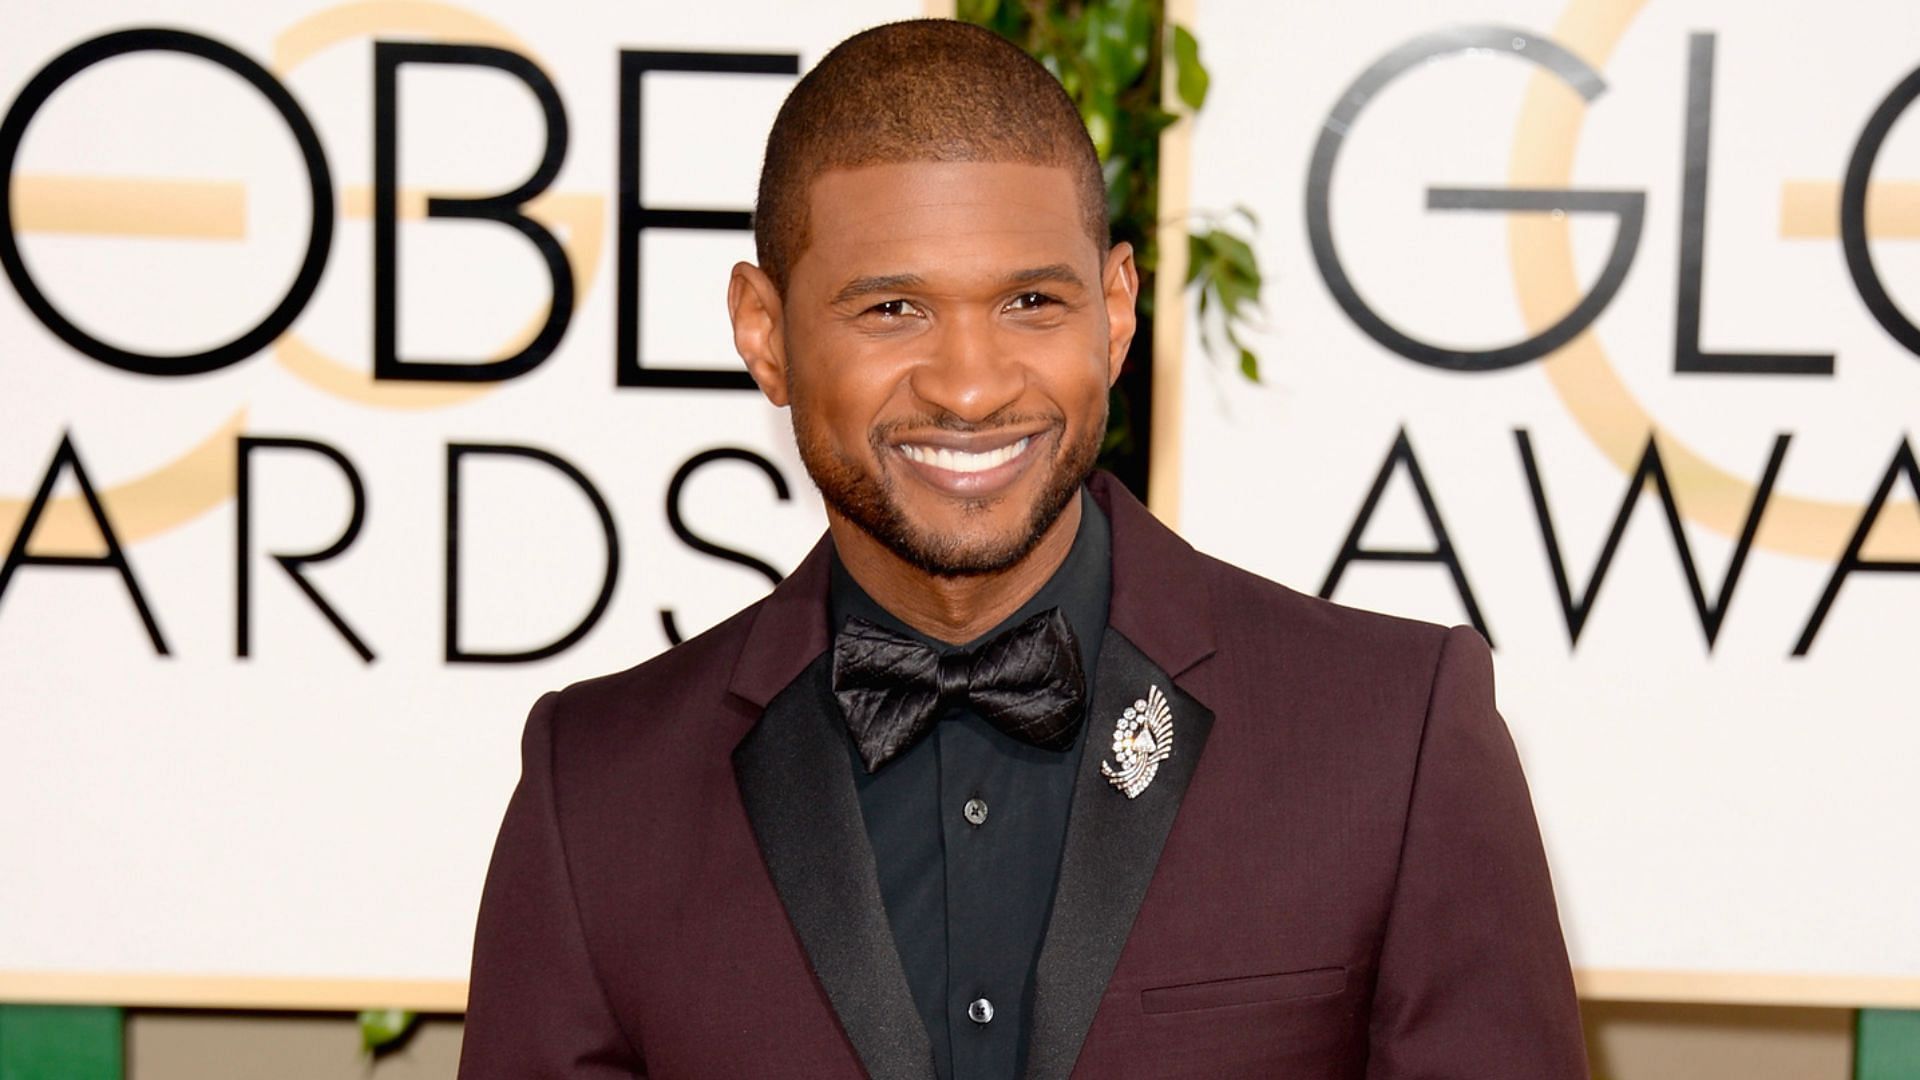 Usher appeared in The Bold and the Beautiful for just nine episodes (Images via Jason Merritt)